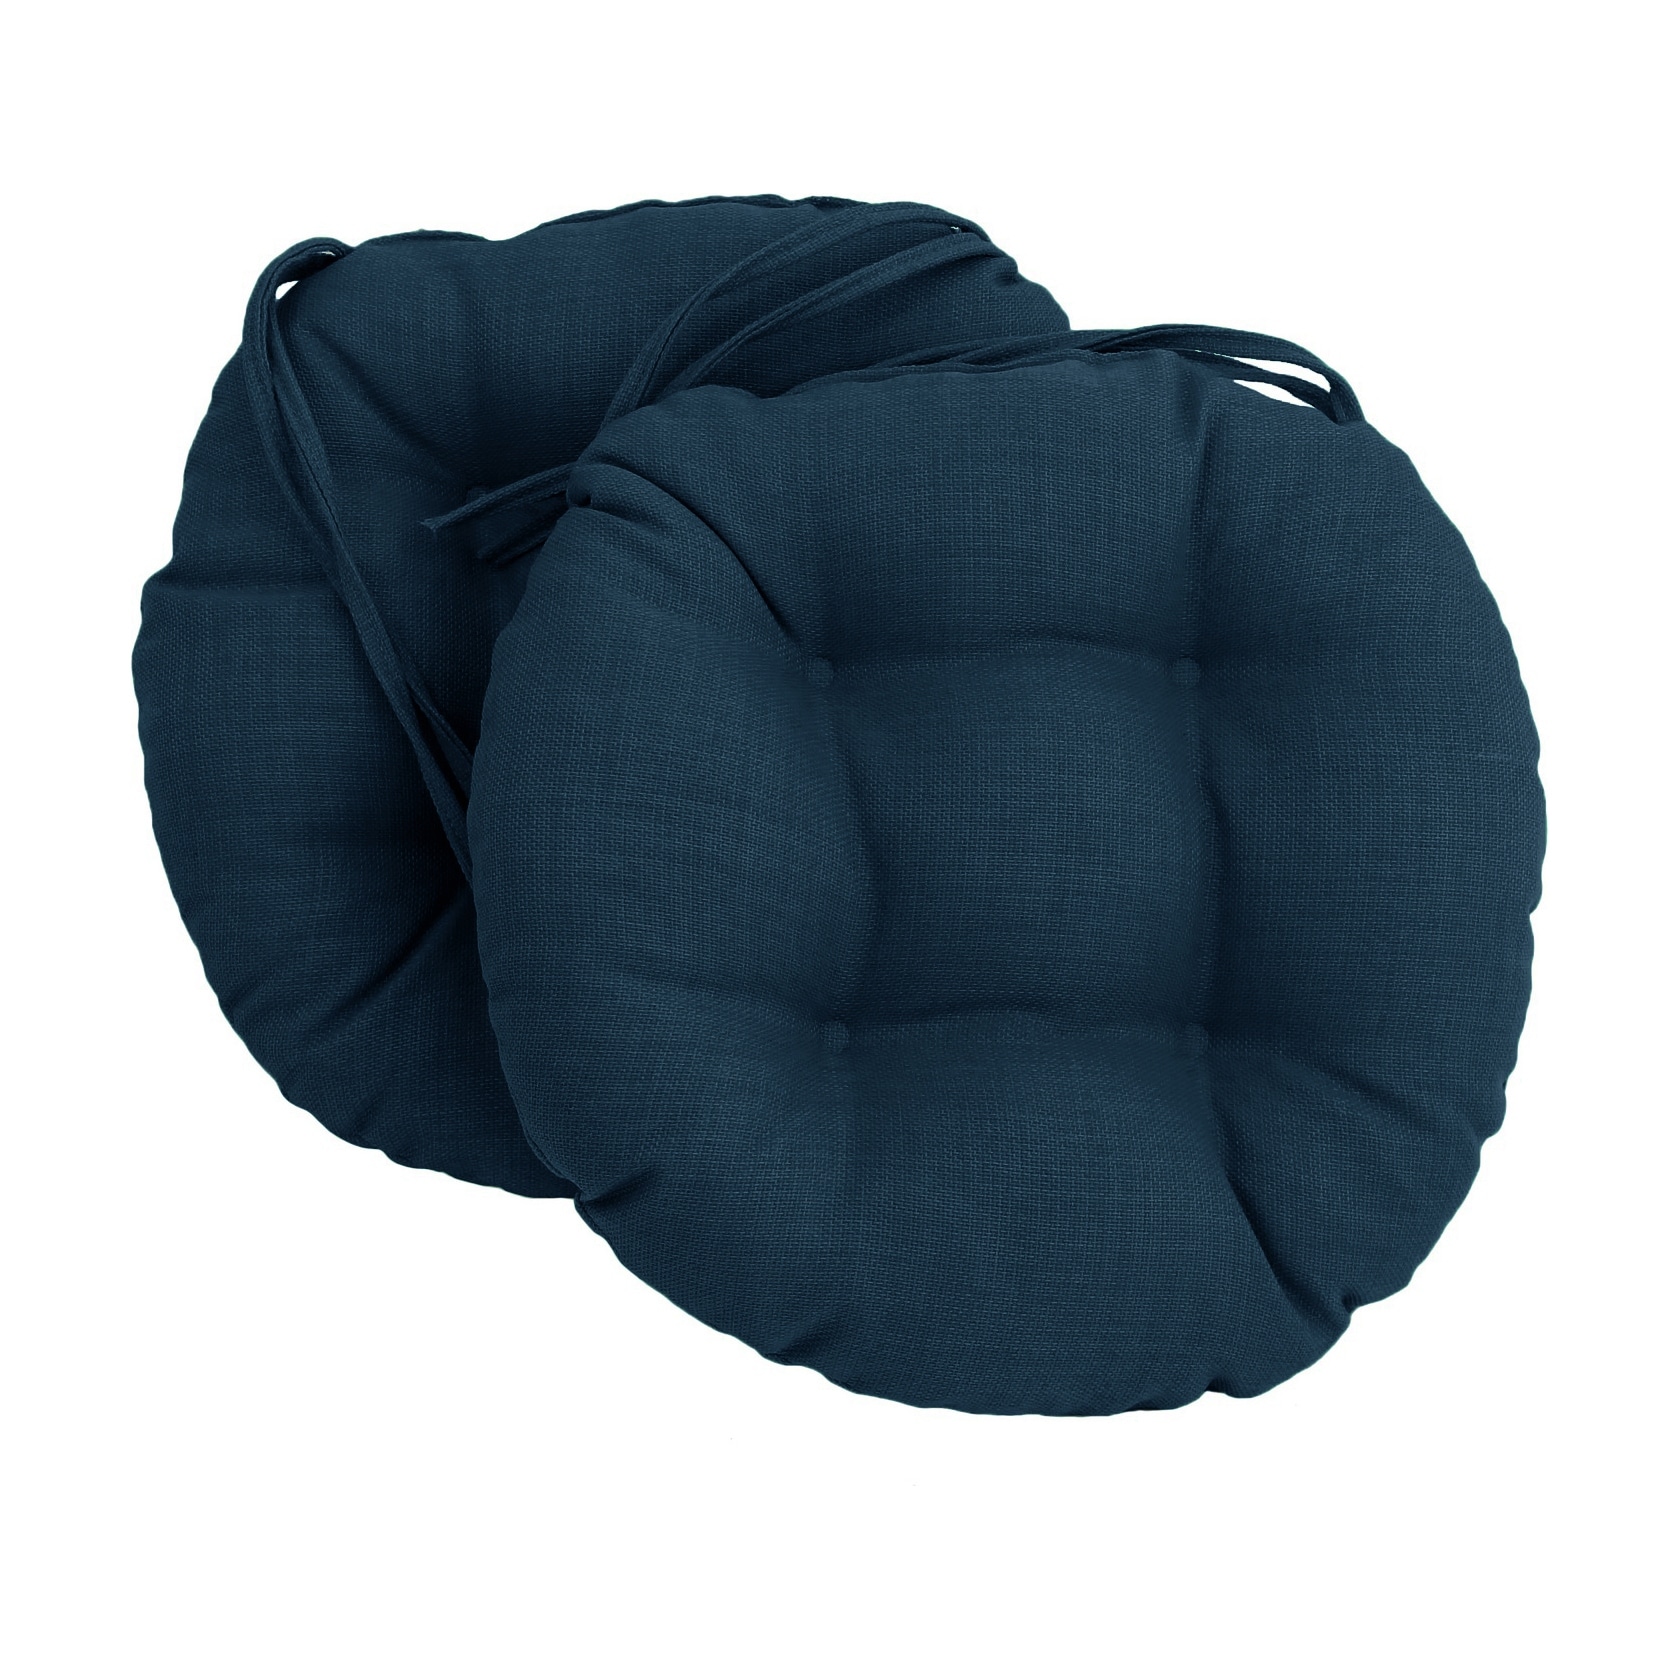 16-inch Round Indoor/Outdoor Chair Cushions (Set of 2)